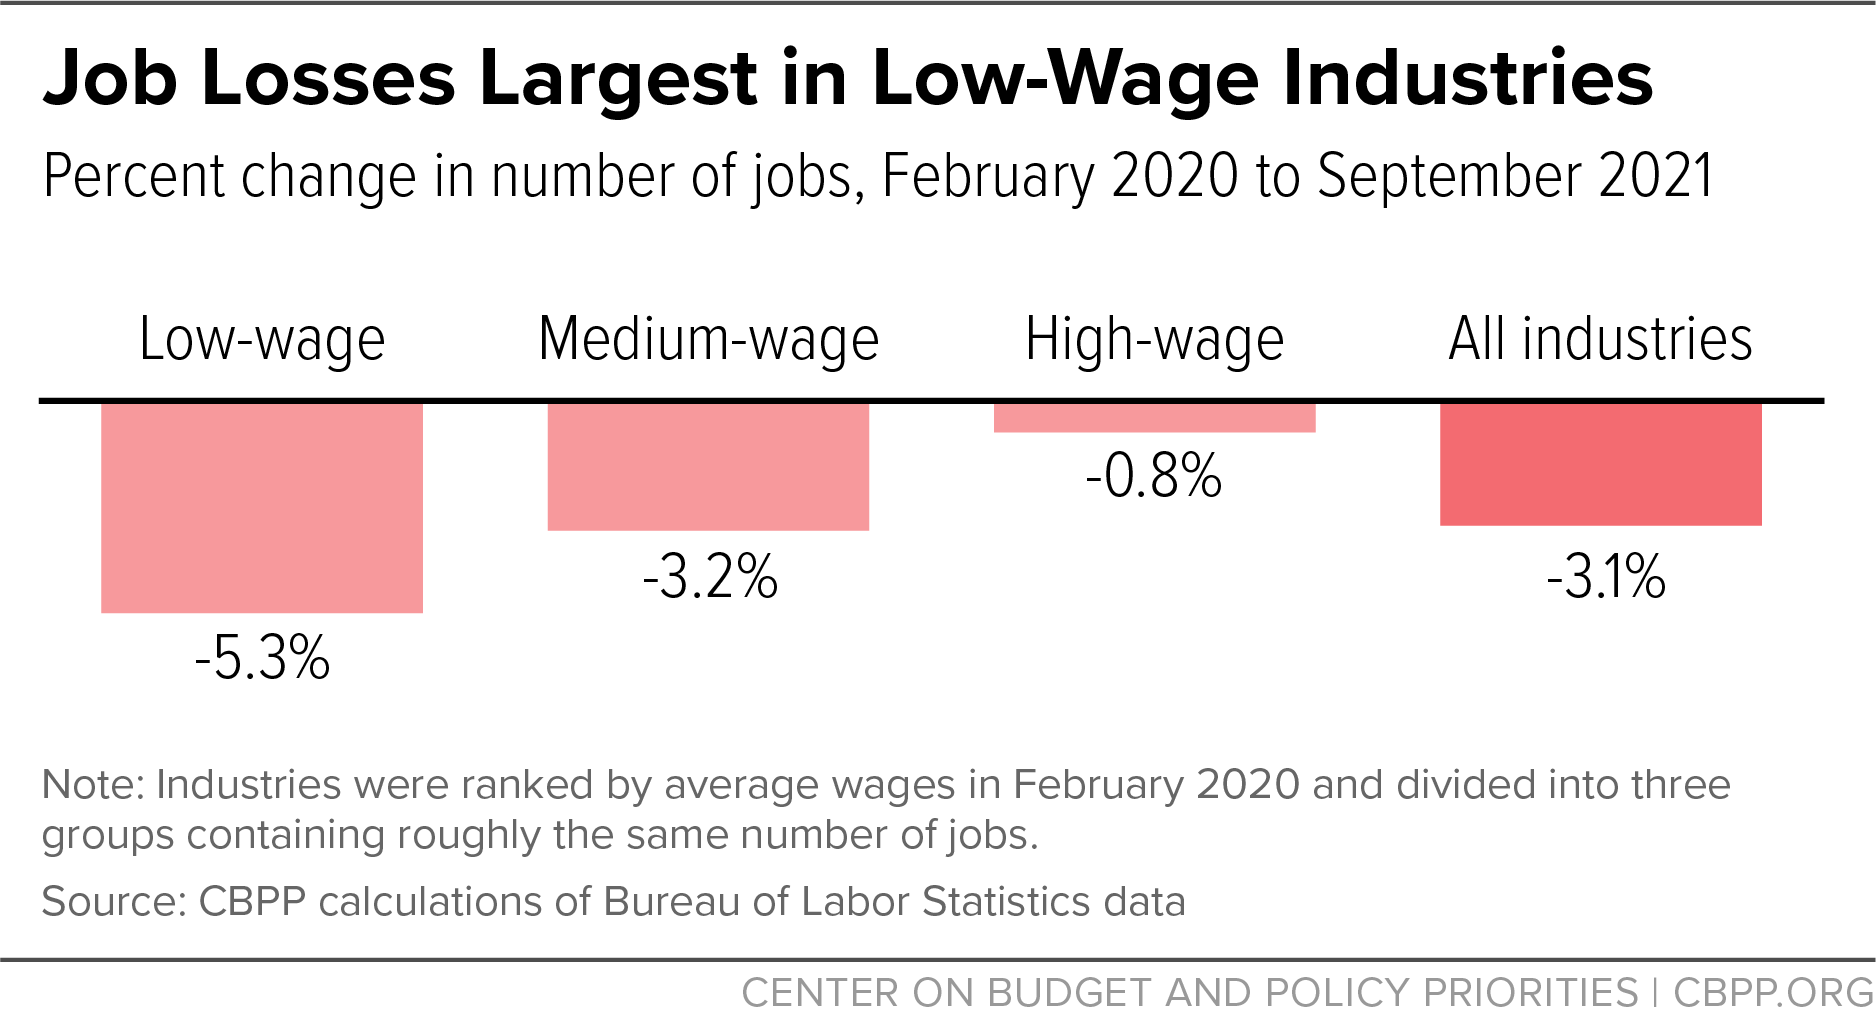 Job Losses Largest in Low-Wage Industries